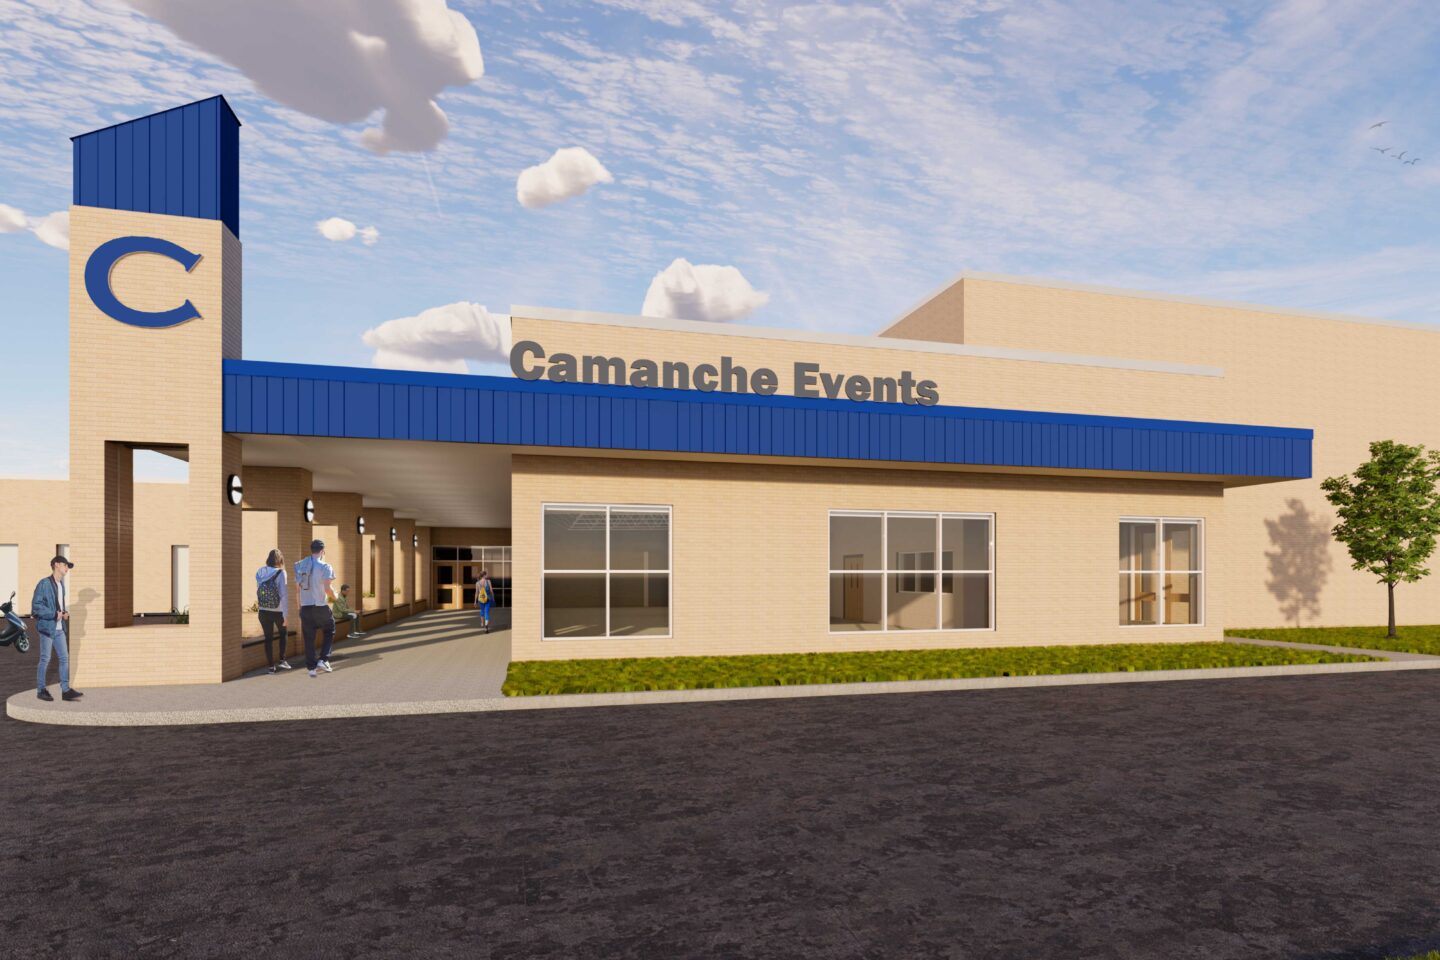 A rendering of the Camanche High School events entrance